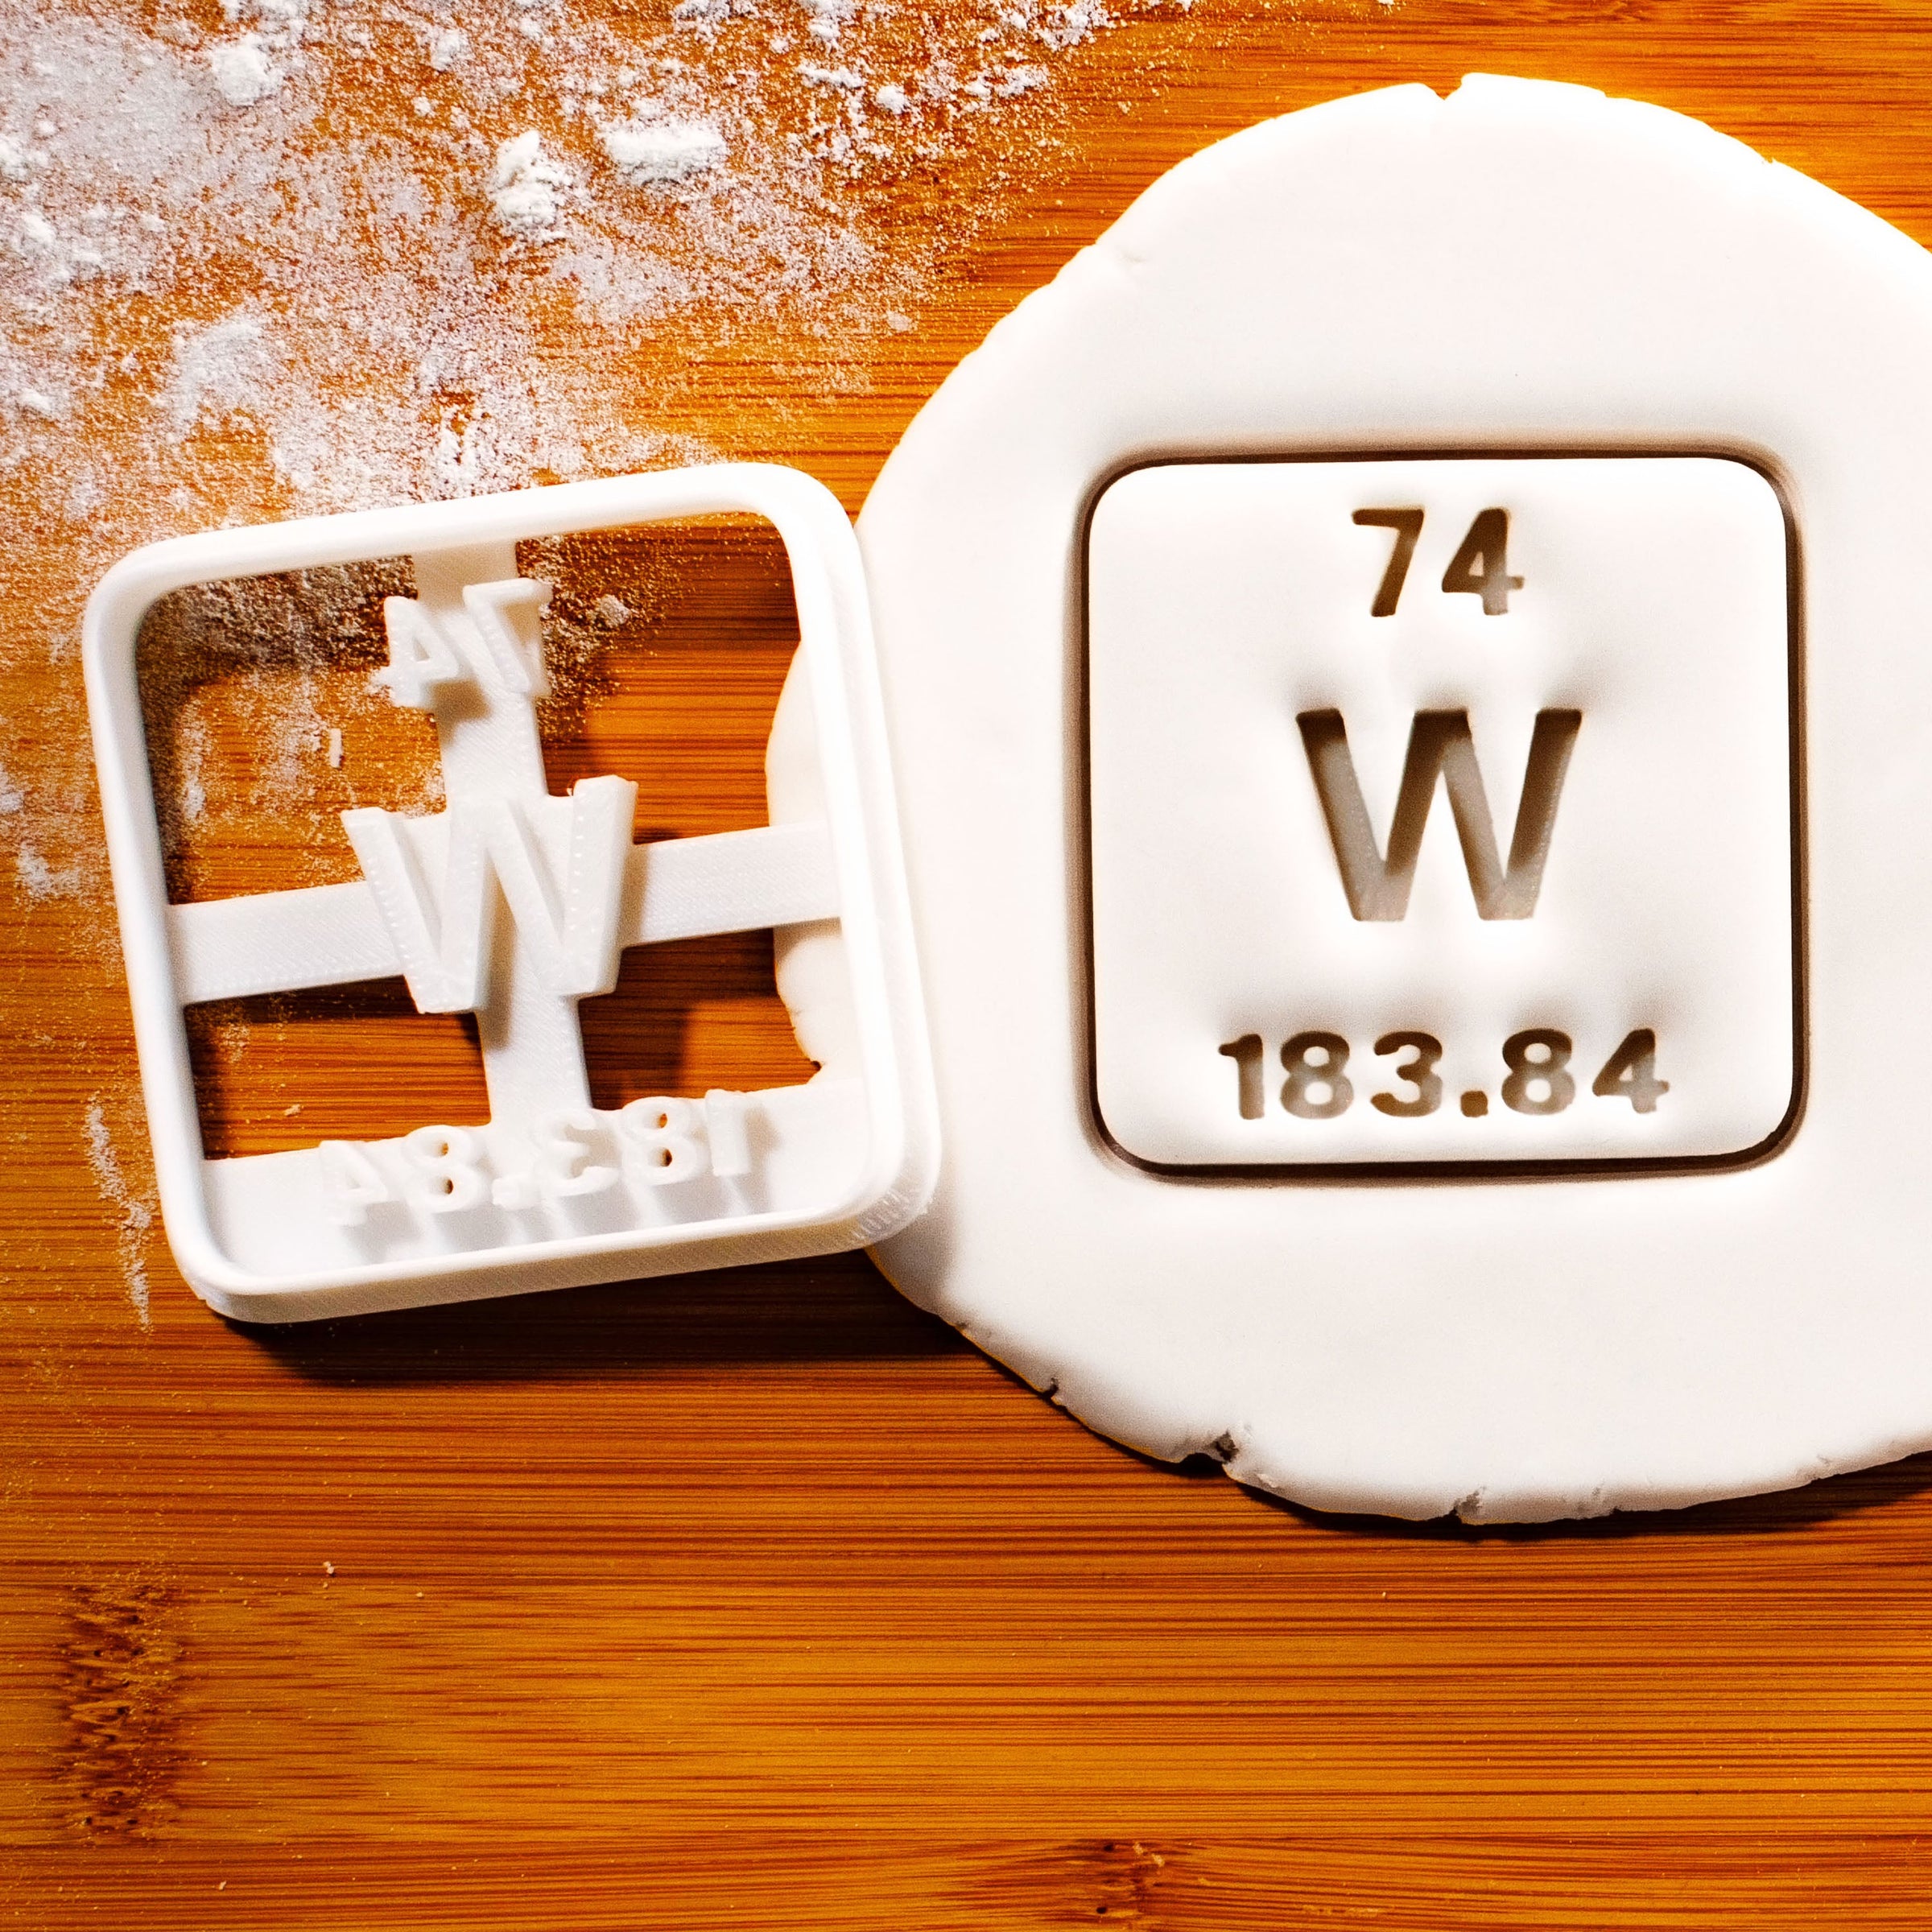 Tungsten Periodic Table Element Cookie Cutters (Symbol W)